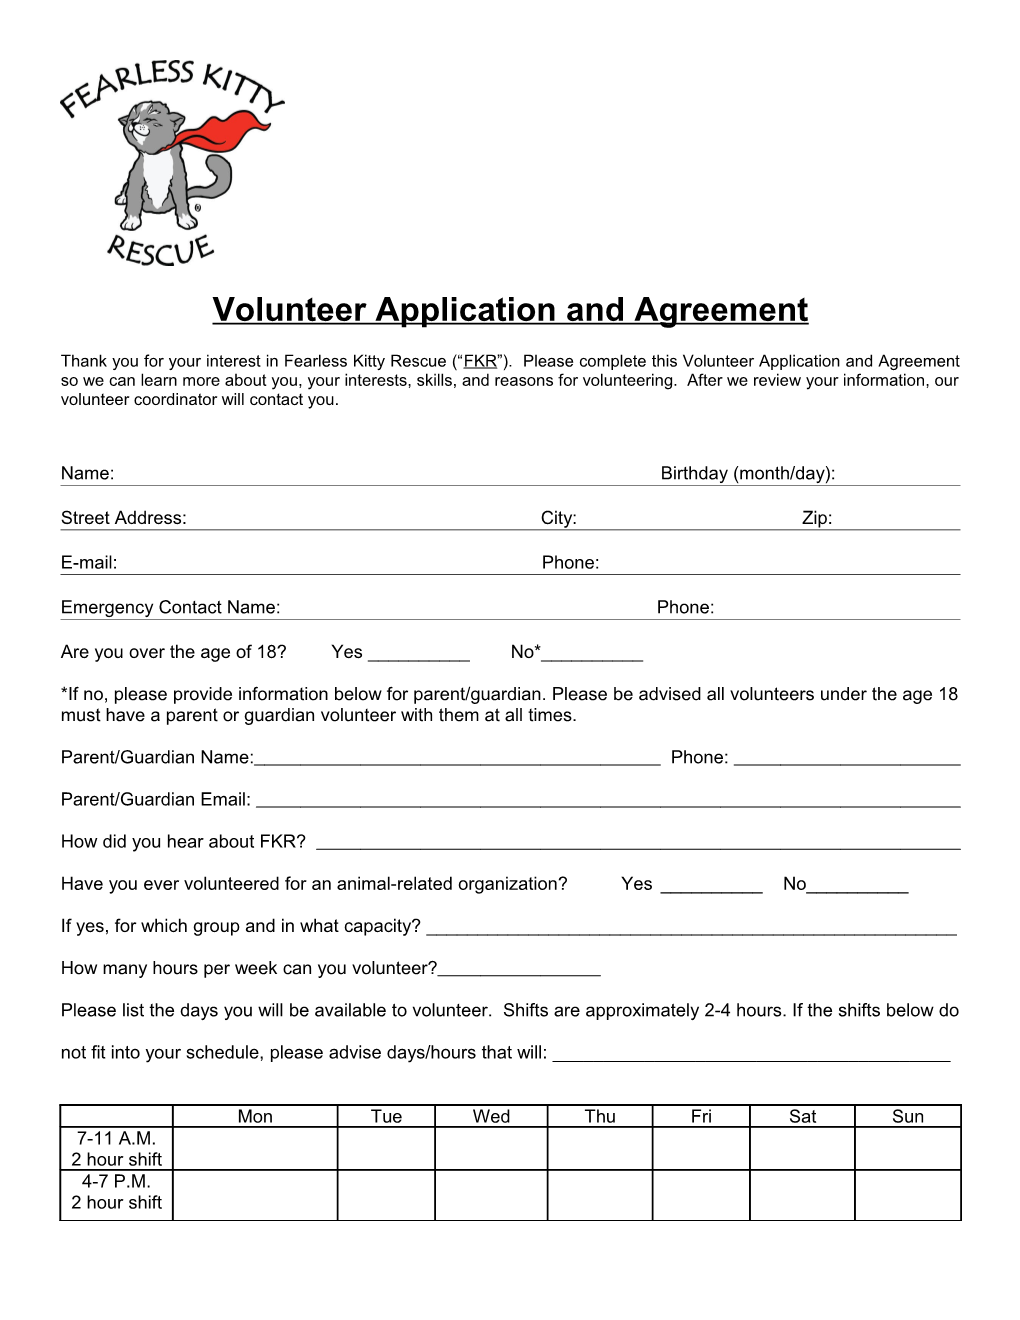 Volunteer Application and Agreement